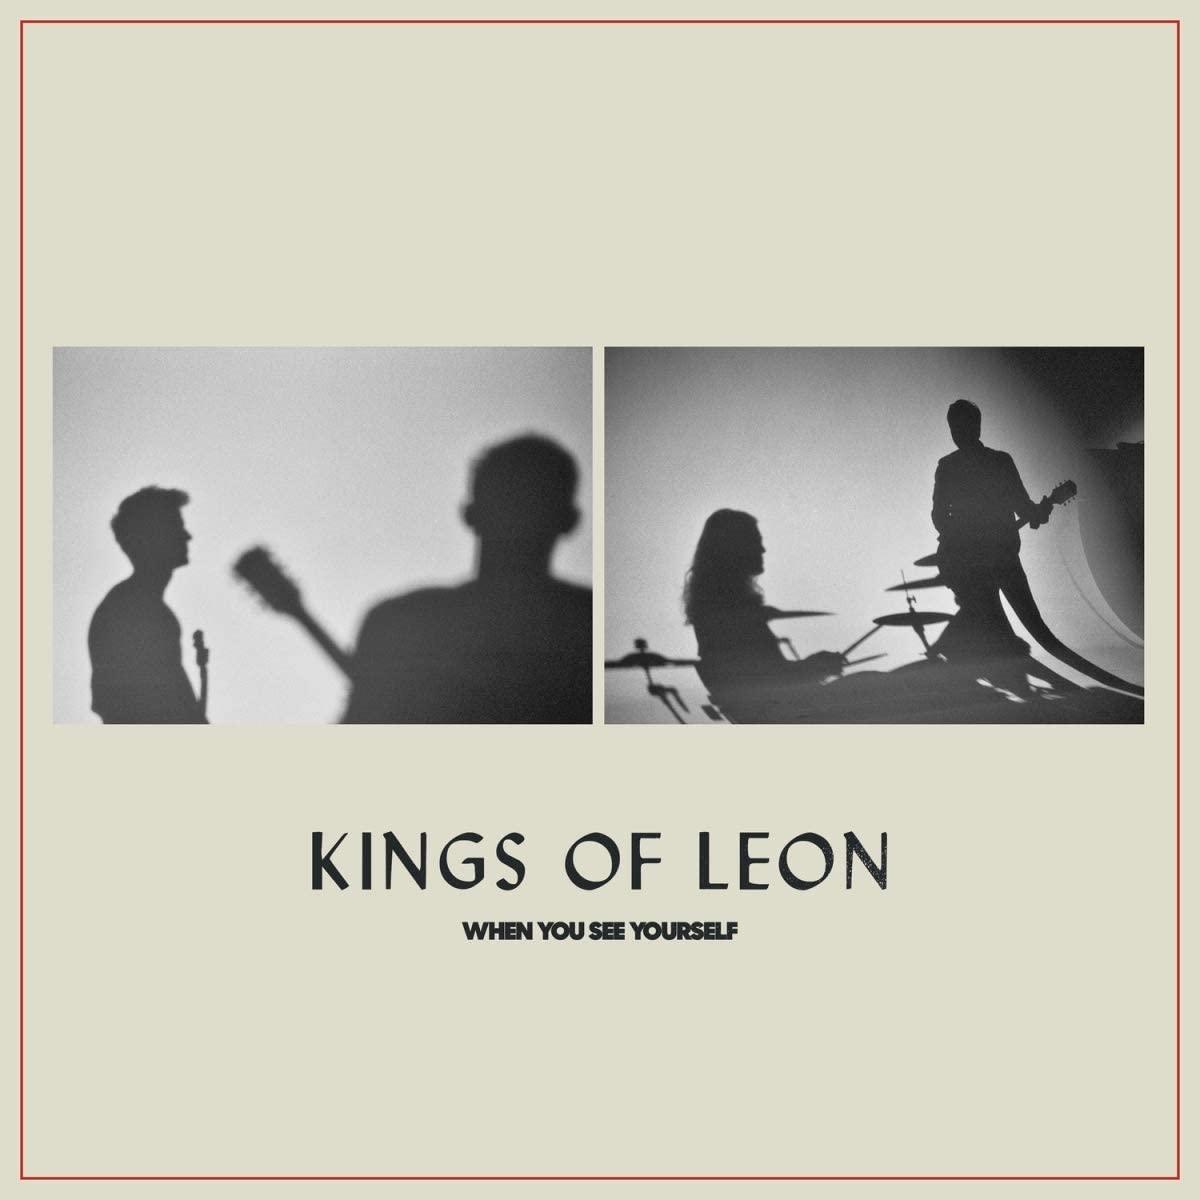 Kings of Leon - When You See Yourself (2021) 2LP